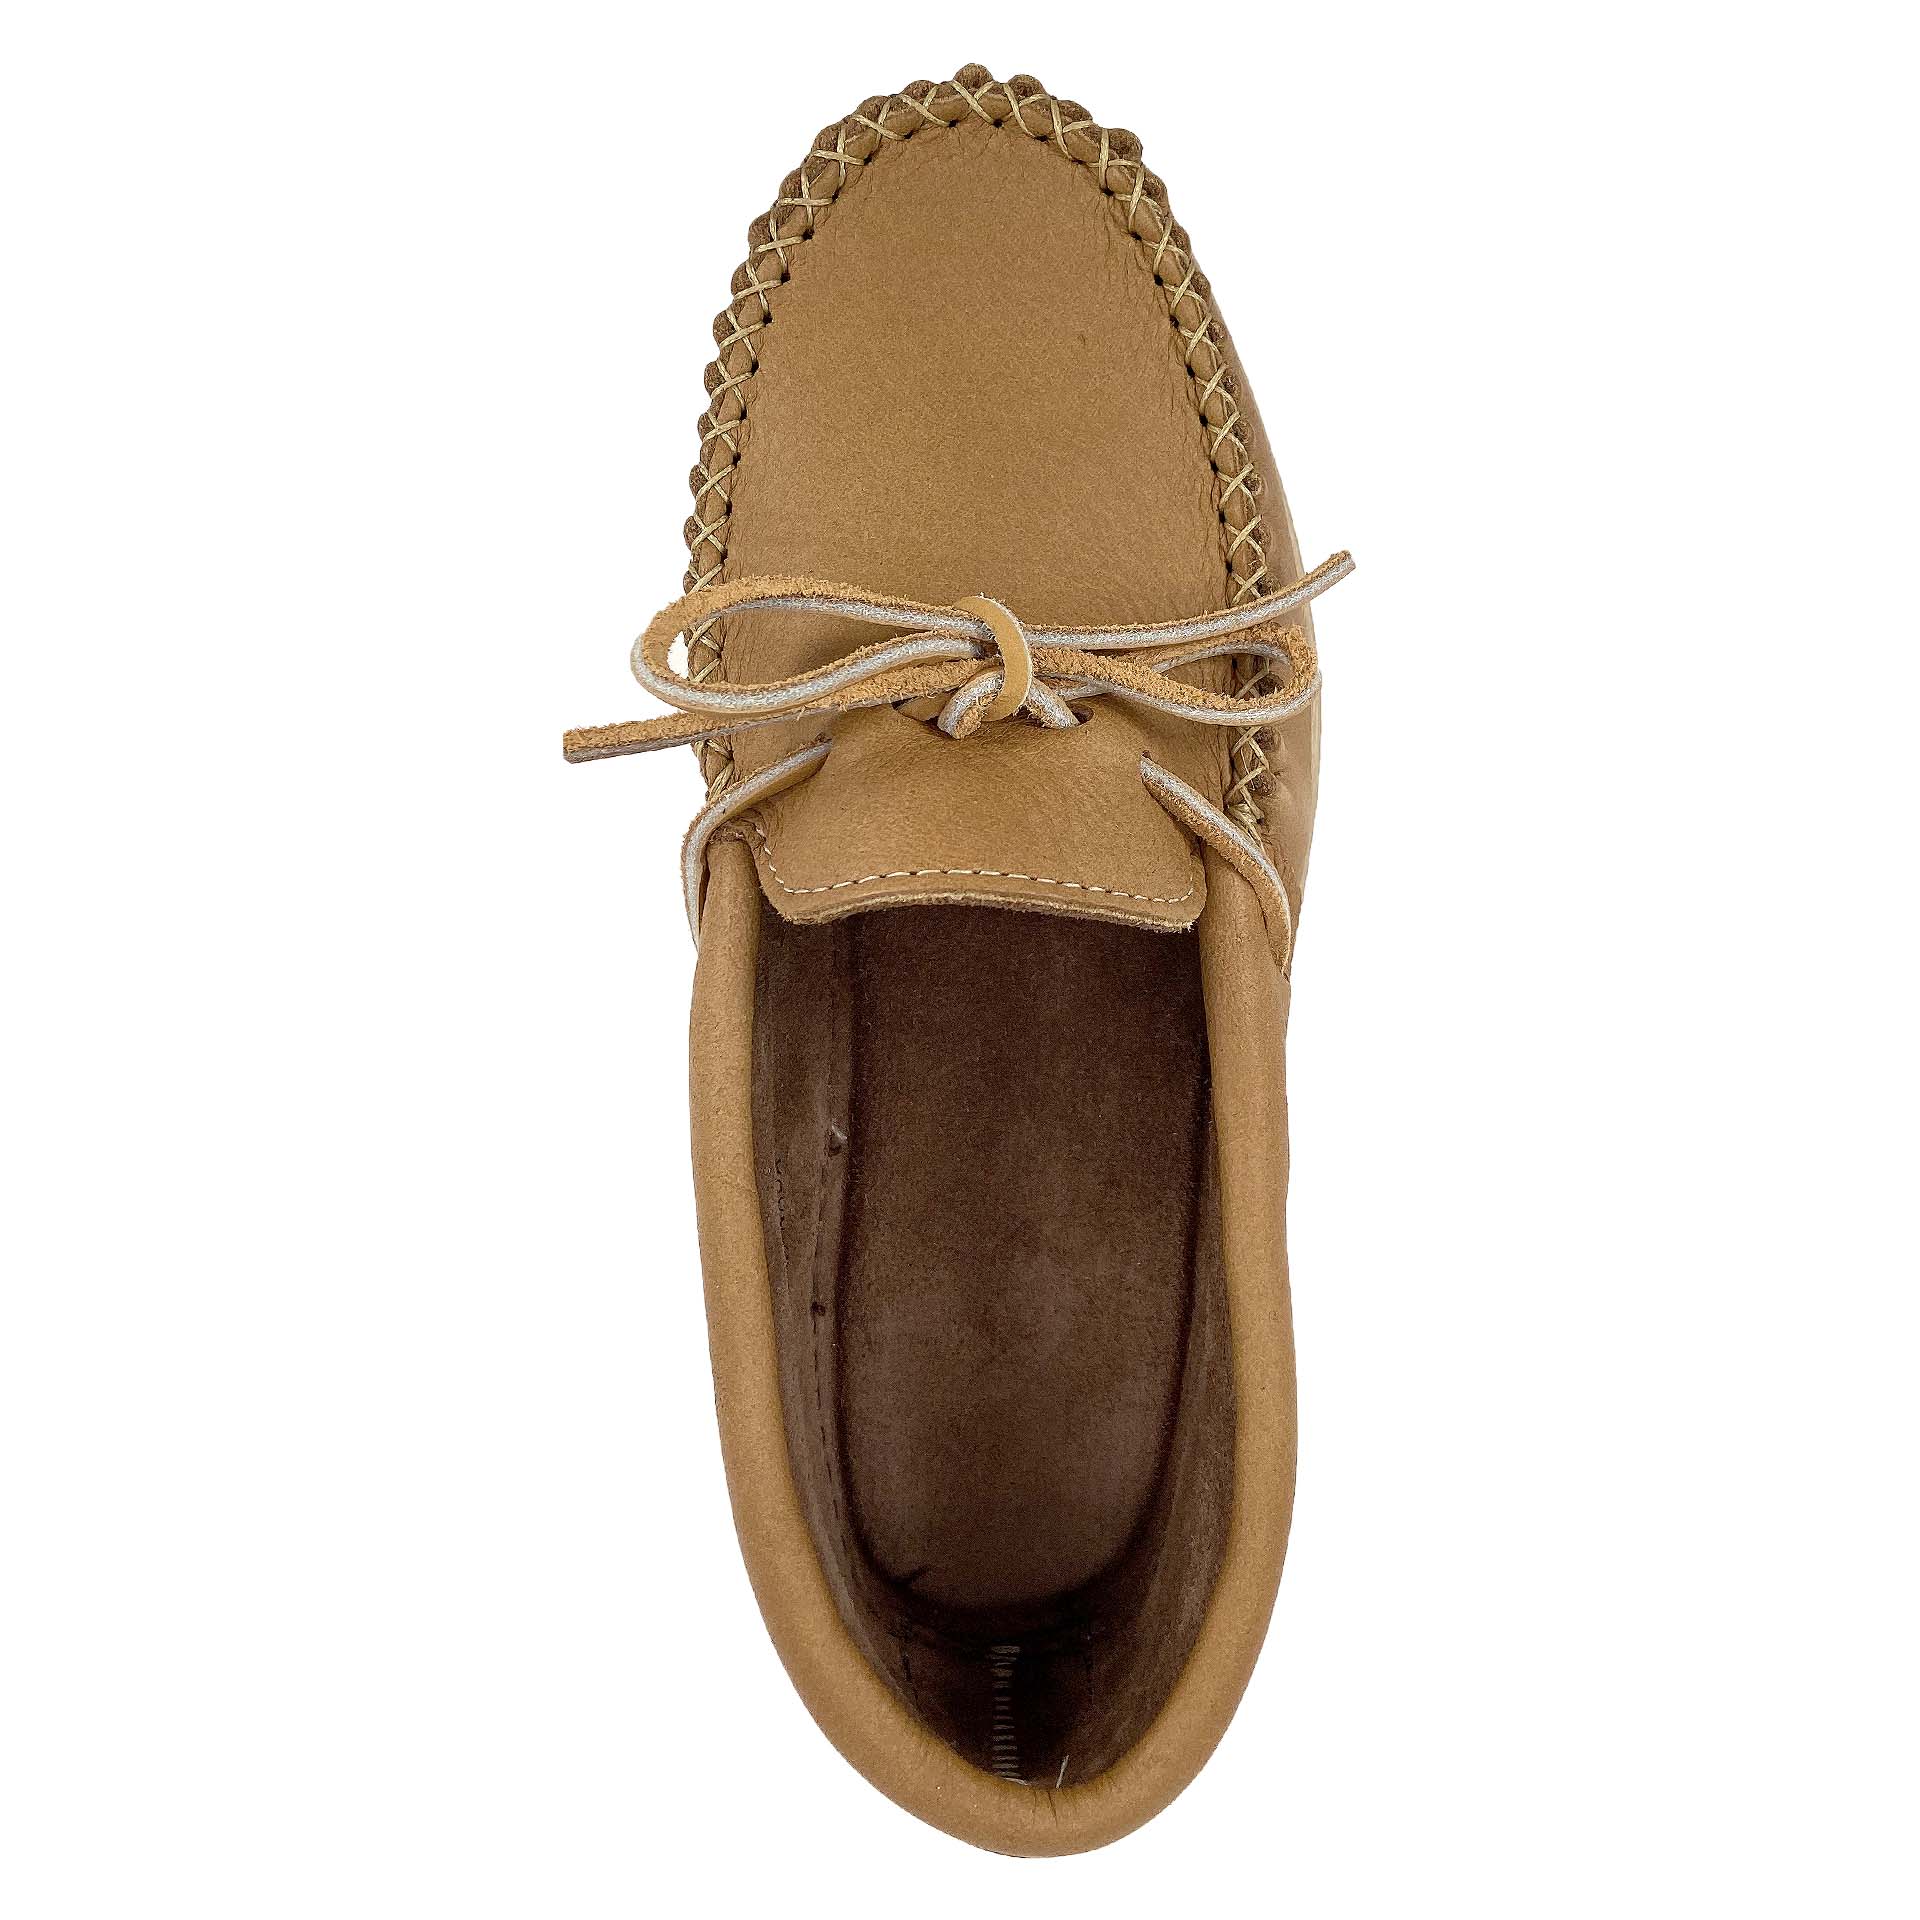 Men's Earthing Moccasin Shoes with Copper Rivet Rubber Soles